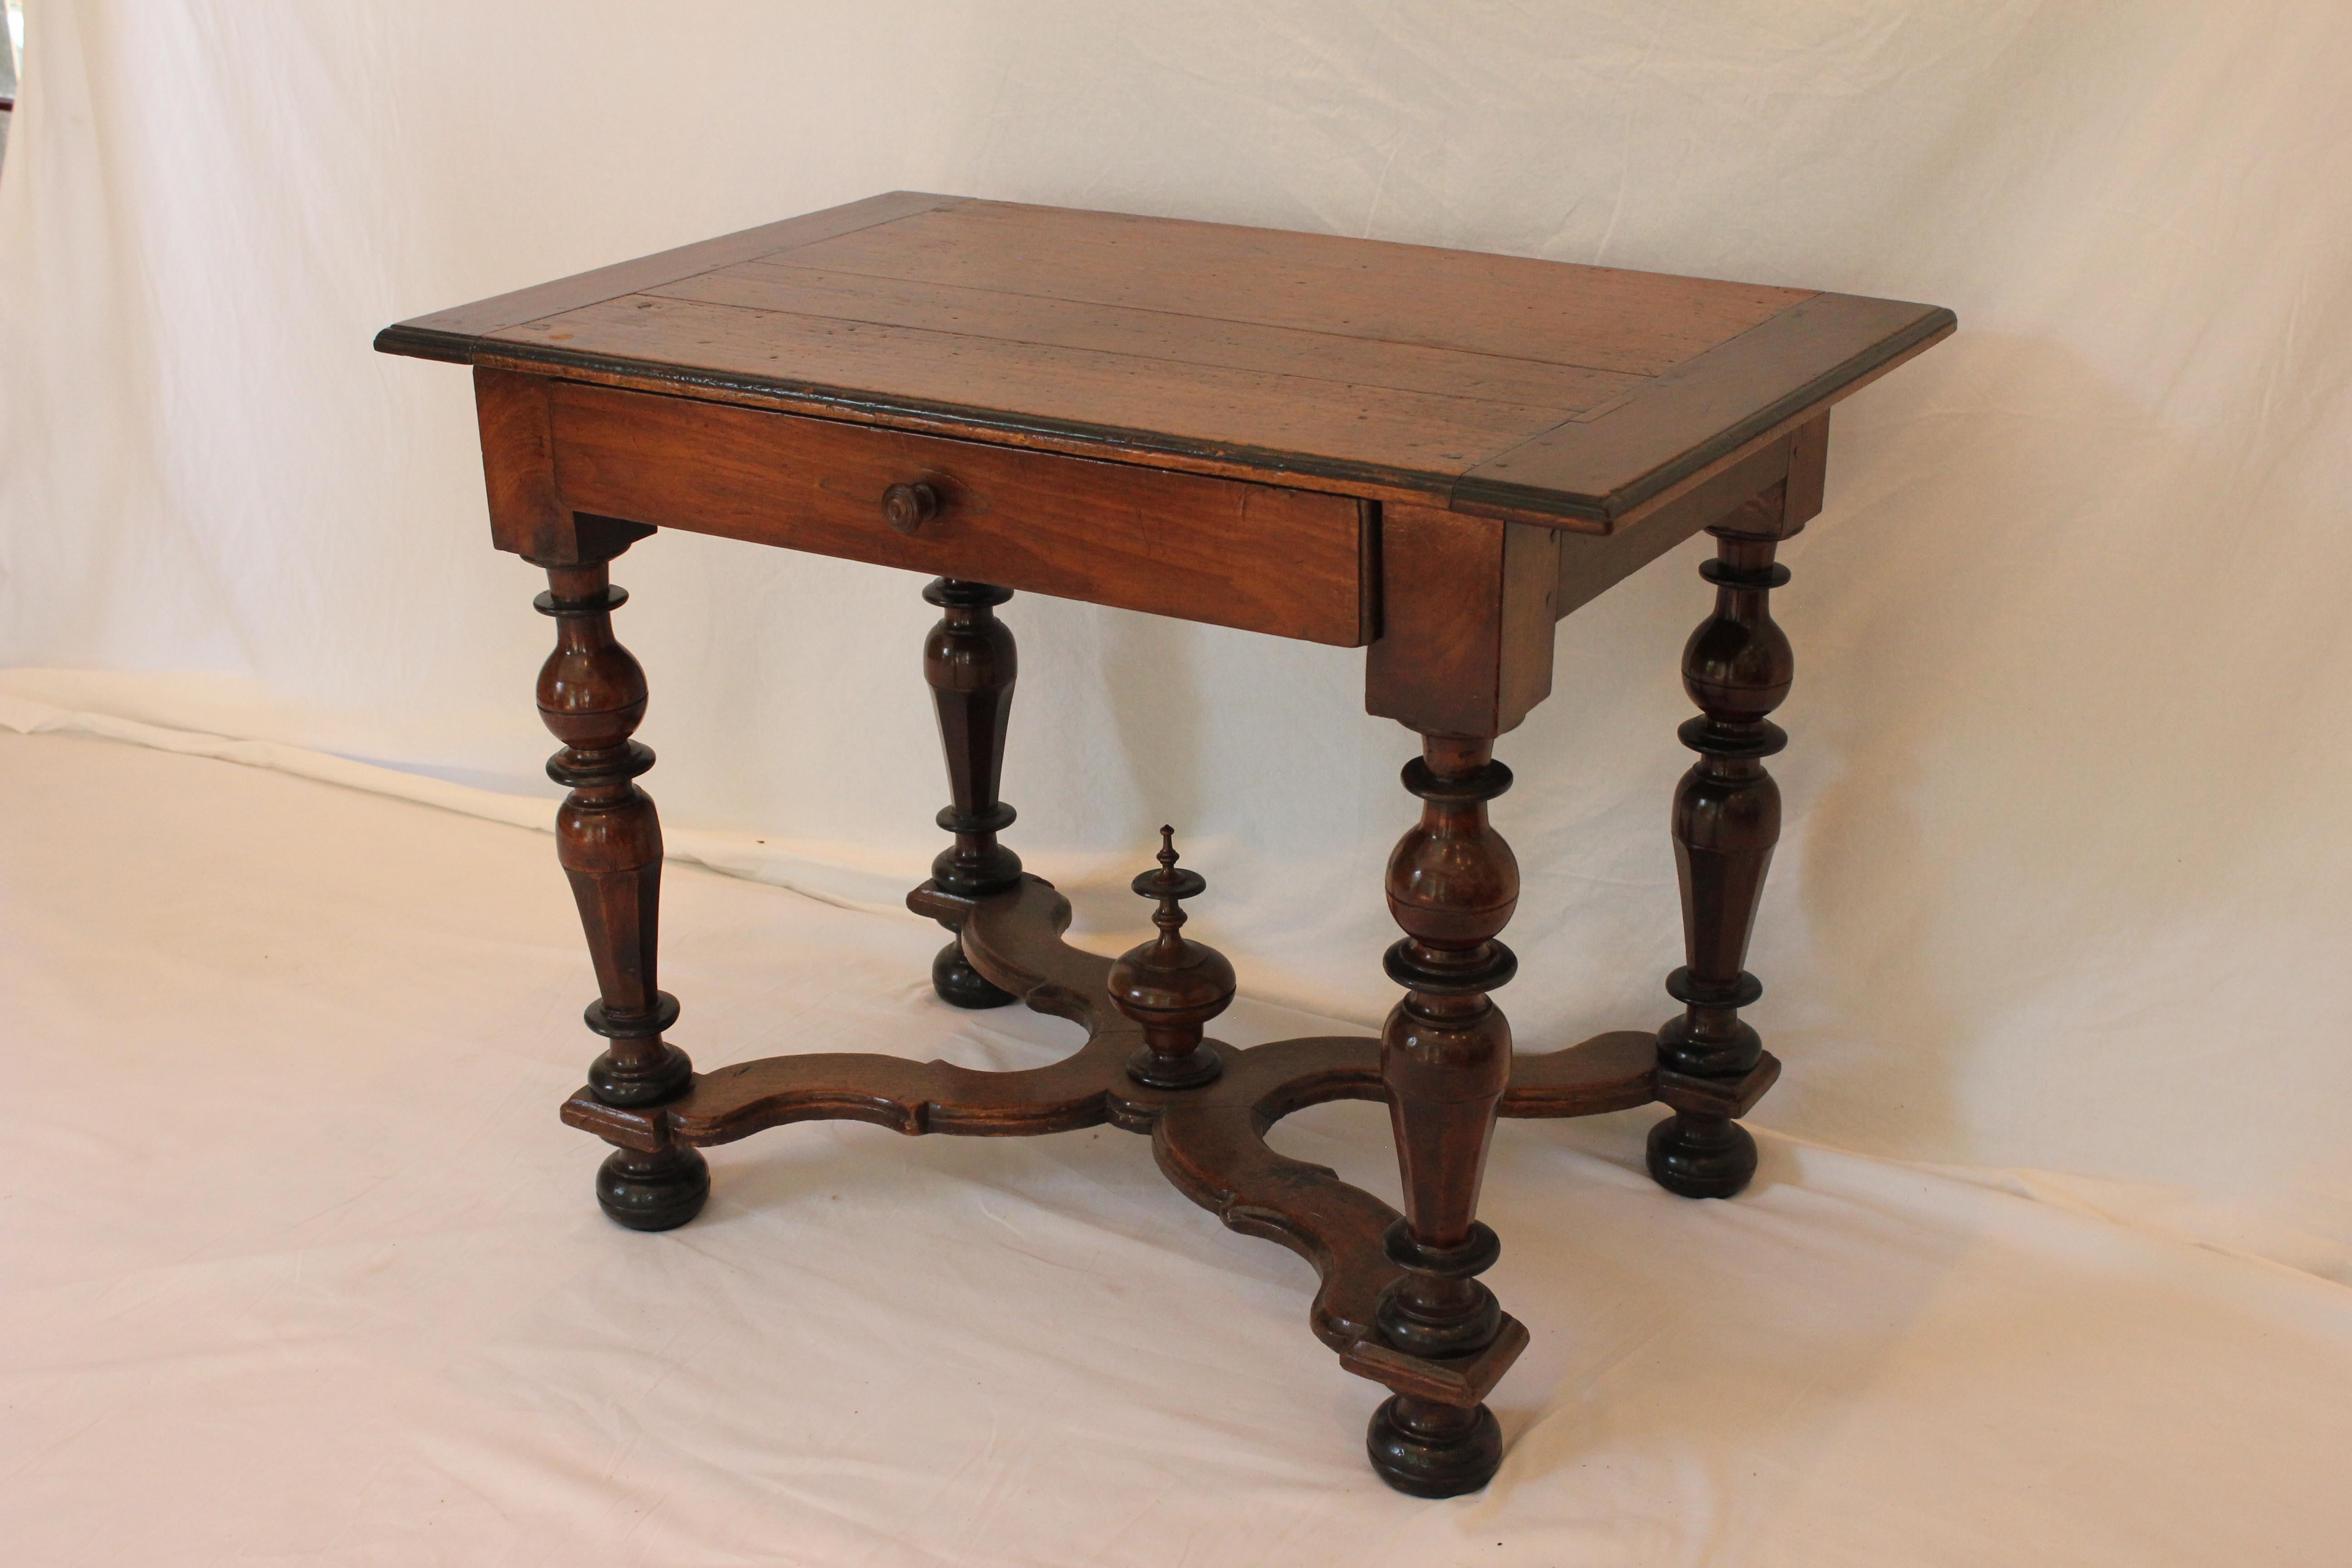 Age: 1800 - 1850

Furniture Style: William & Mary (1680 - 1730)

Overall Dimensions: Width - 39-1/2